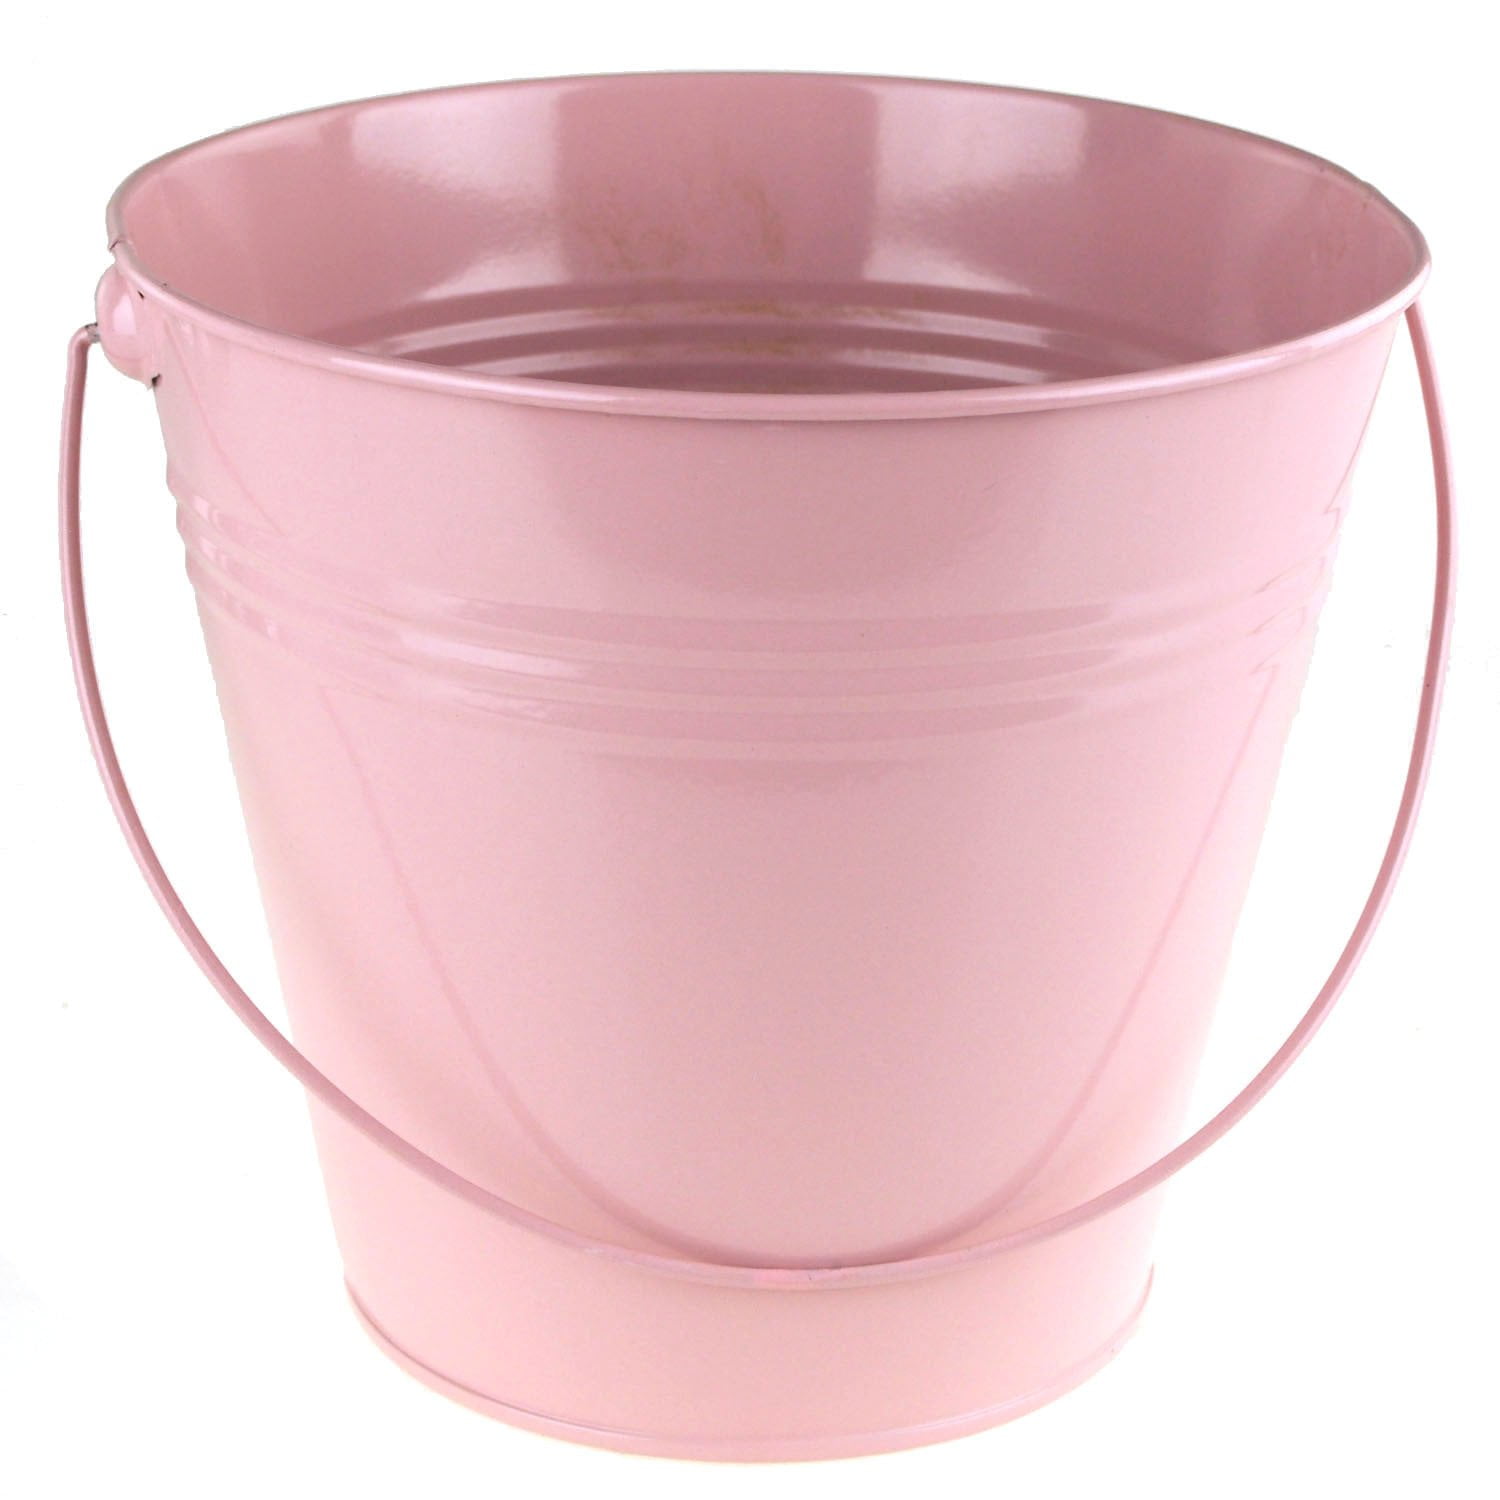 Polka Dot Metal Pail Buckets Party Favor, 5-inch (Hot Pink)